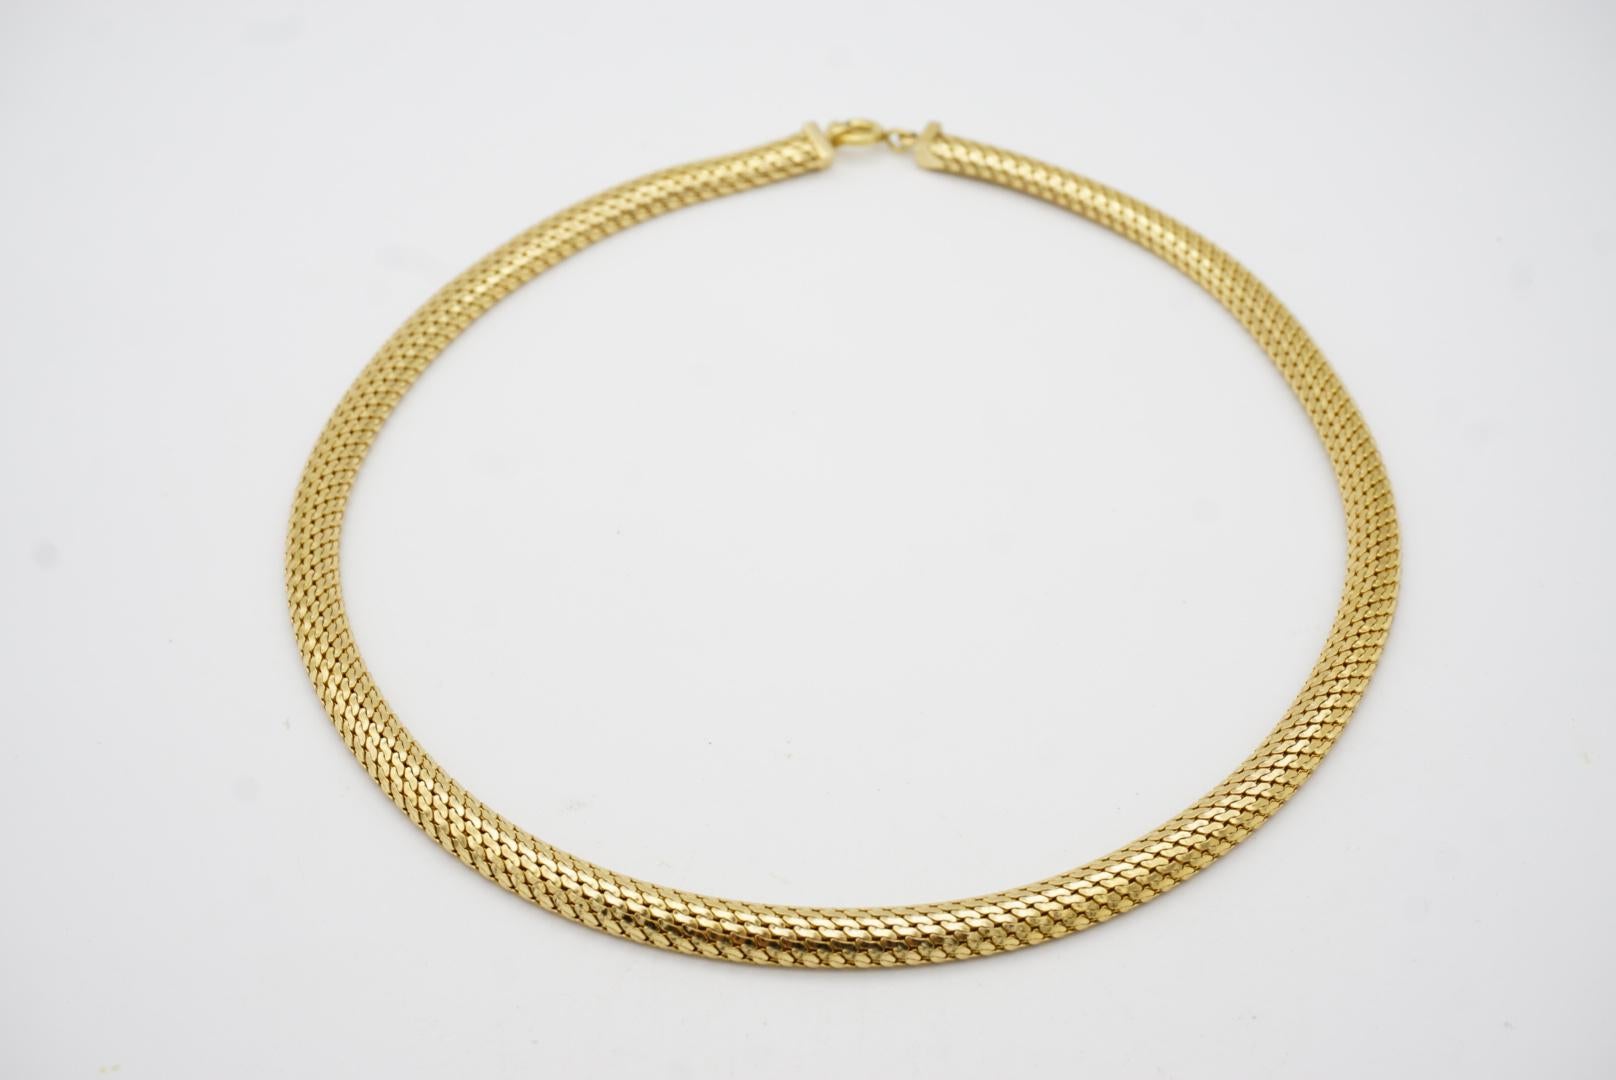 Christian Dior GROSSE 1965 Herringbone Classic Curb Woven Chain Rope Necklace 6